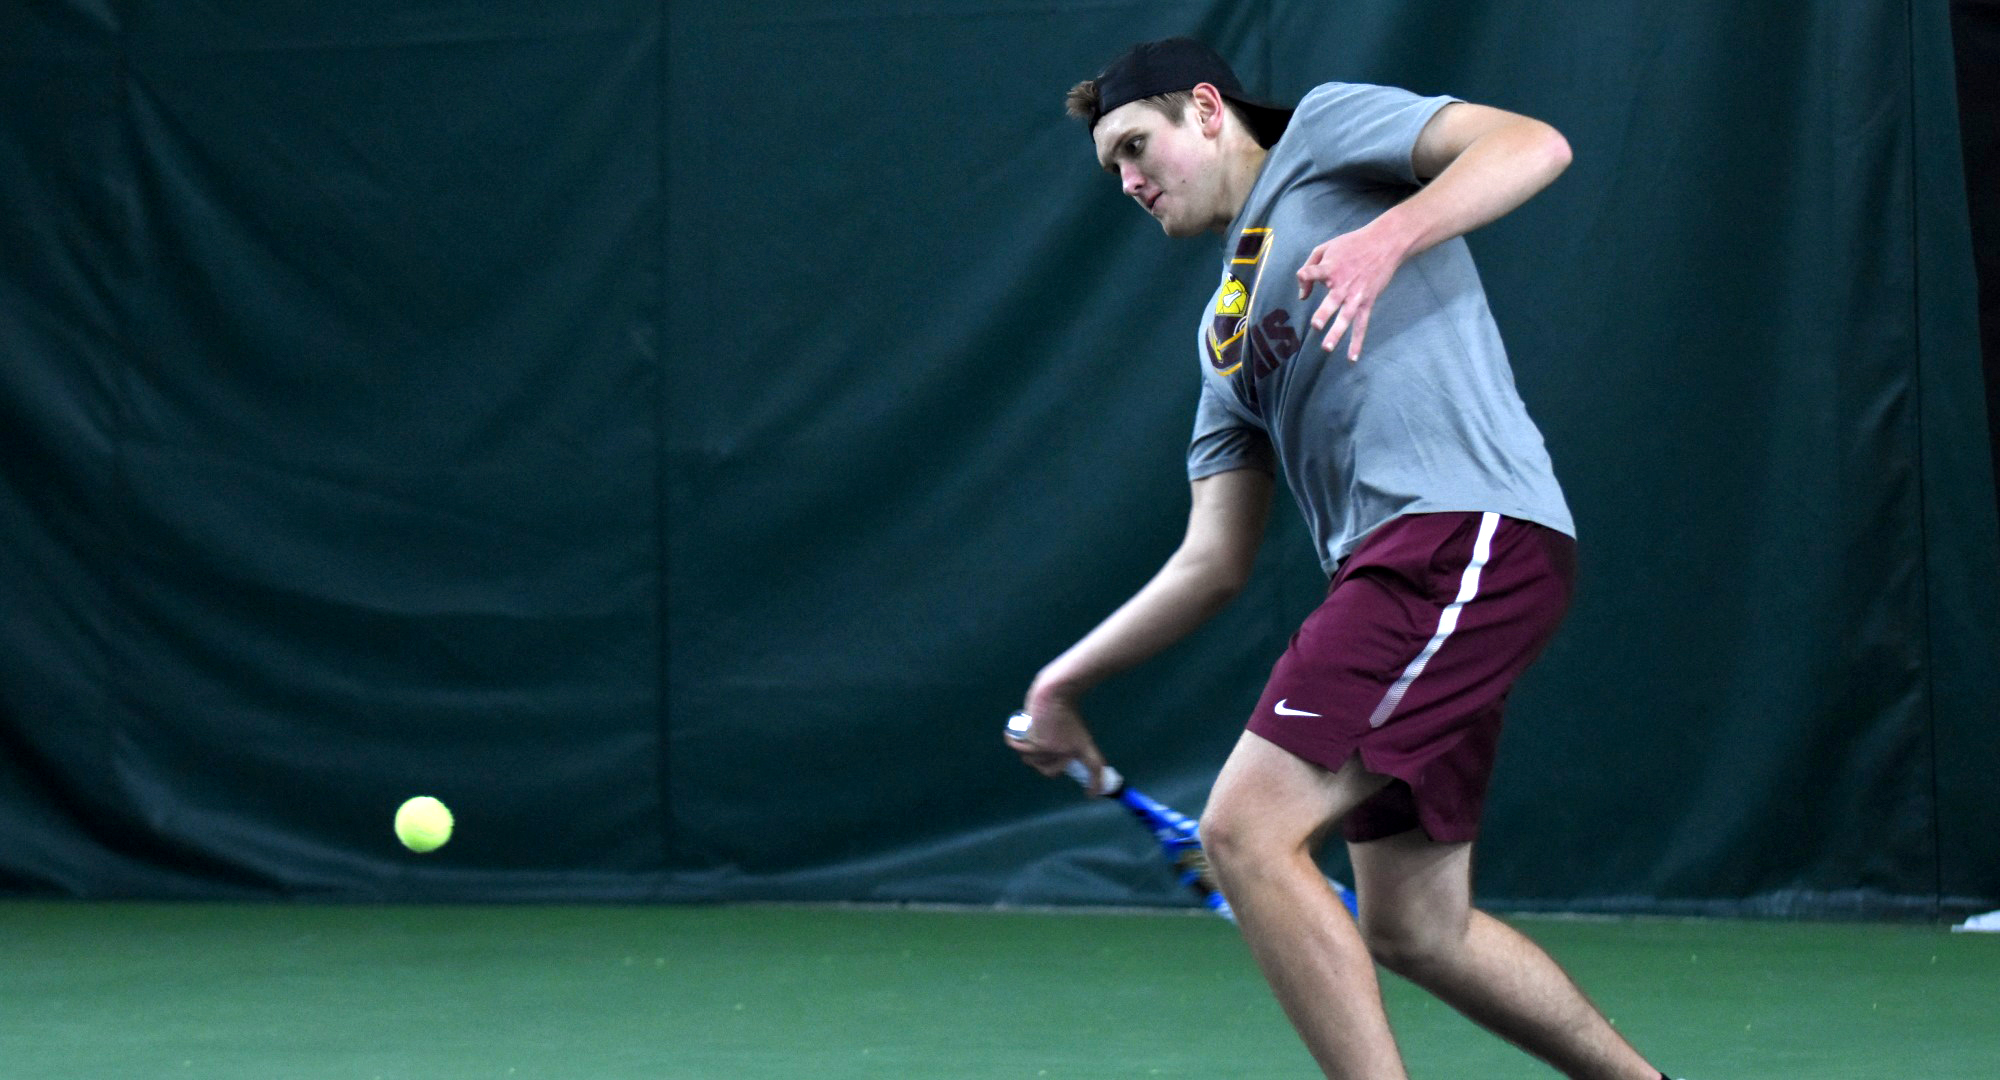 Sophomore Ben Swanson collected his 10th singles win of the season in the Cobbers' match at Hamline.